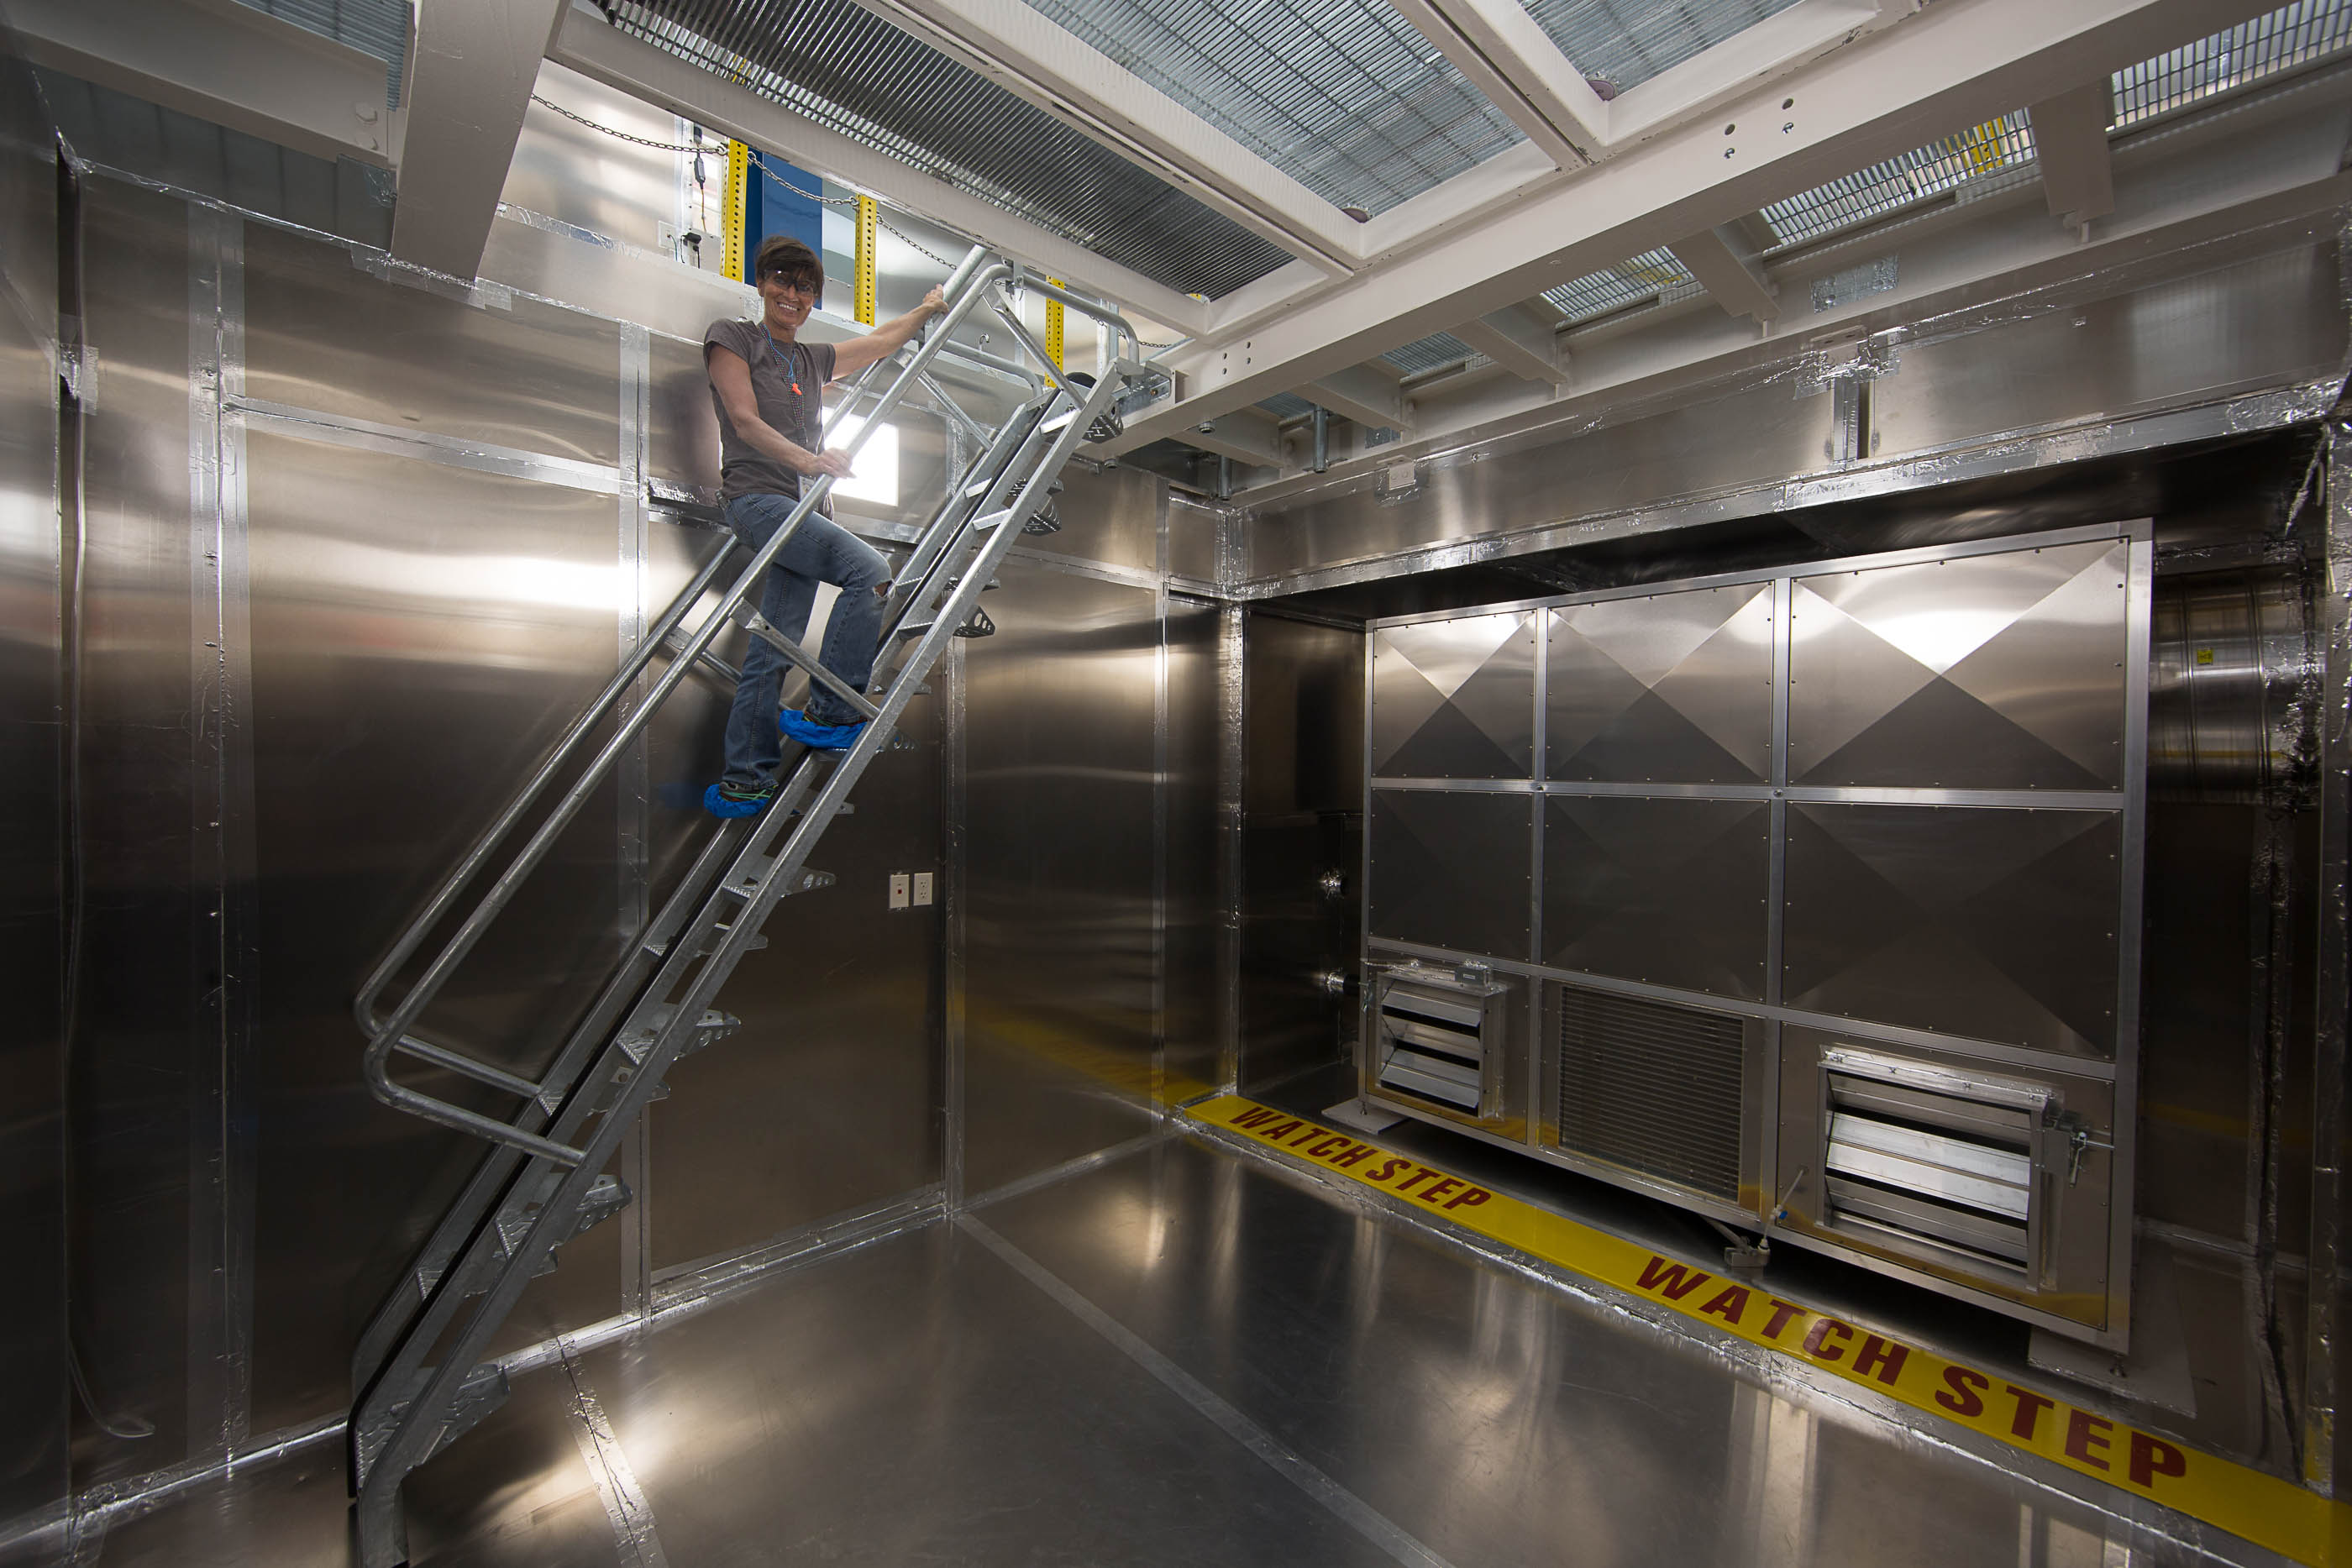 A woman stands on stair in a pit under the clean room